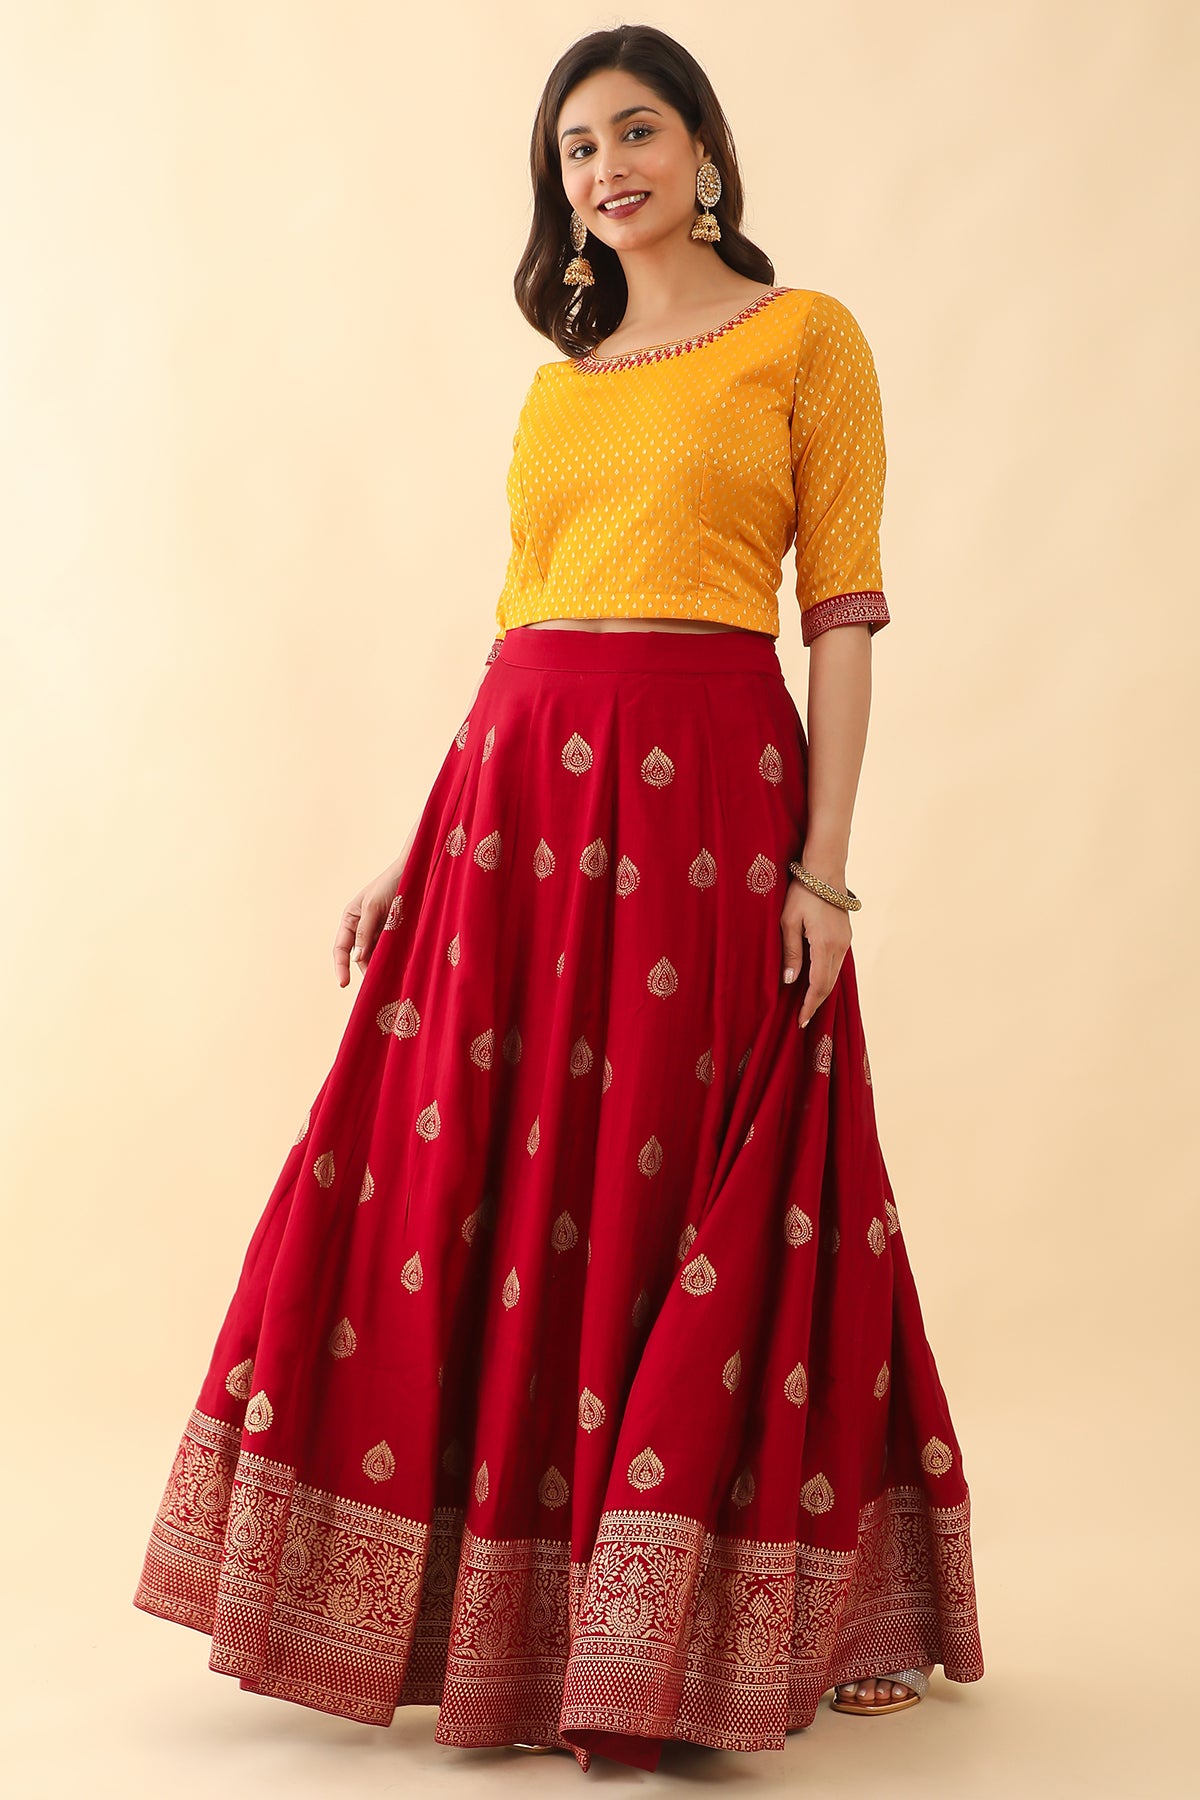 Floral Embroidered Borcade Top With Floral Motif Printed Skirt Set - Yellow & Red